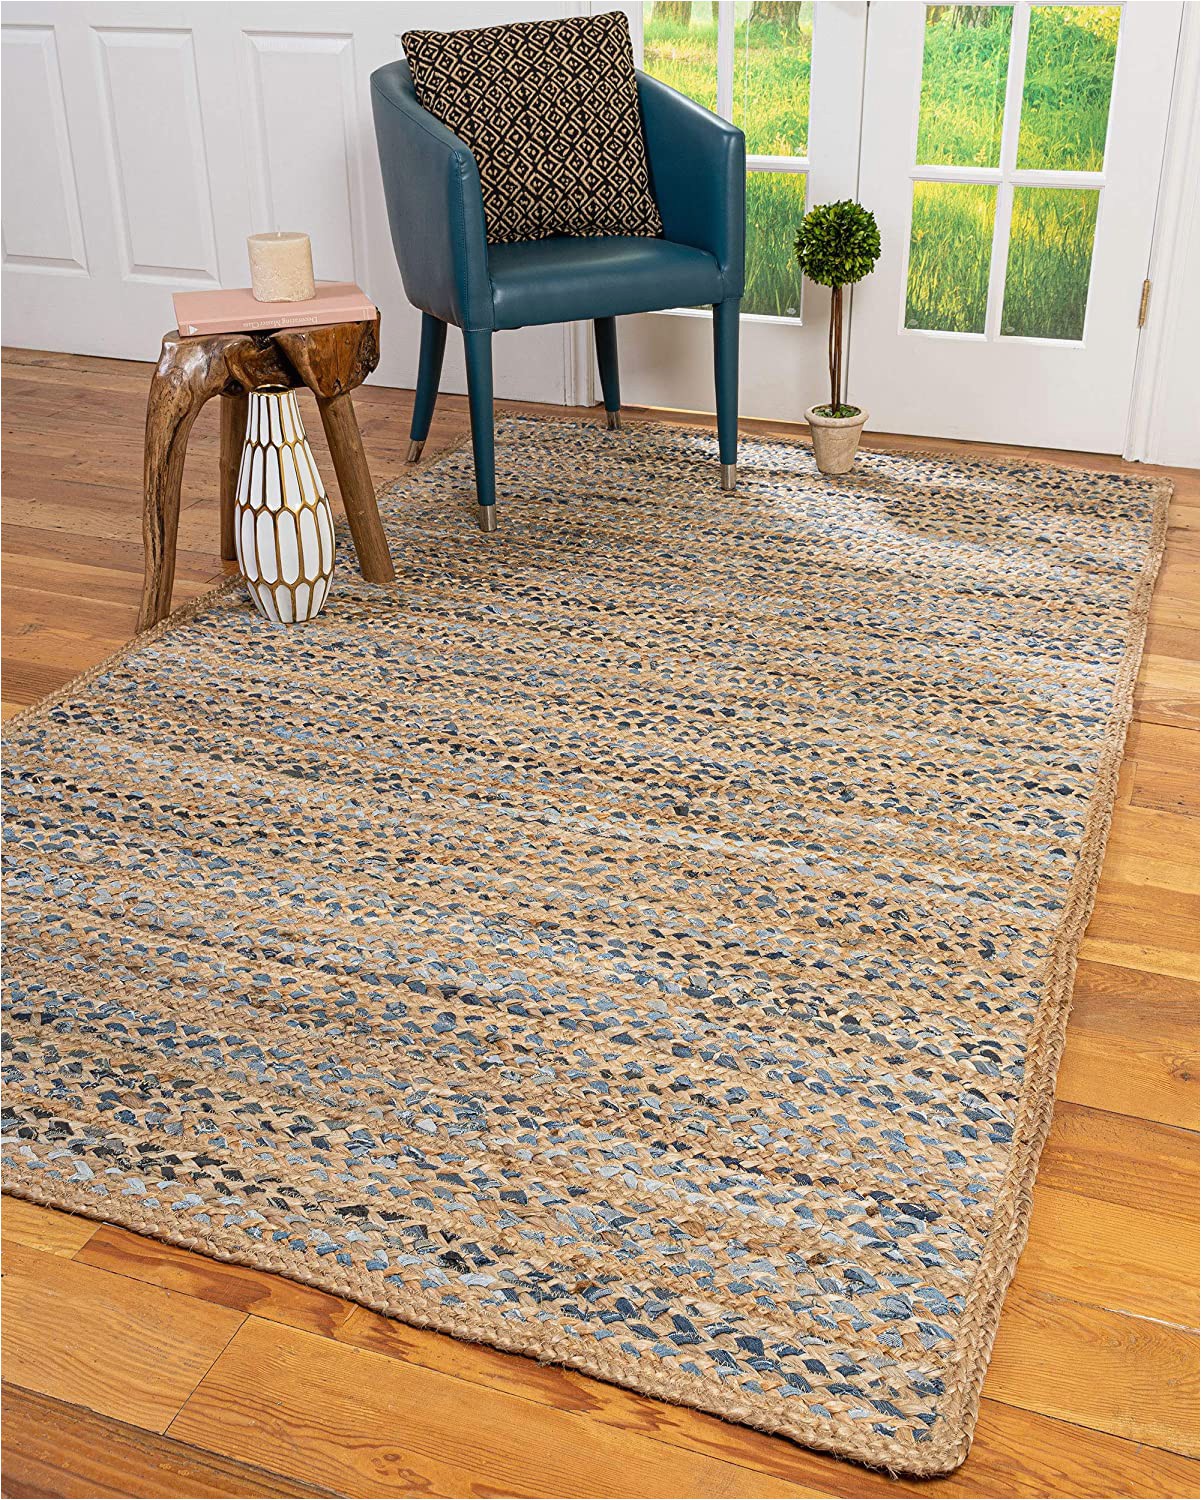 5 by 5 area Rugs Natural area Rugs Handmade Brooklyn Multicolor Cotton Jute Rug 5 X 8